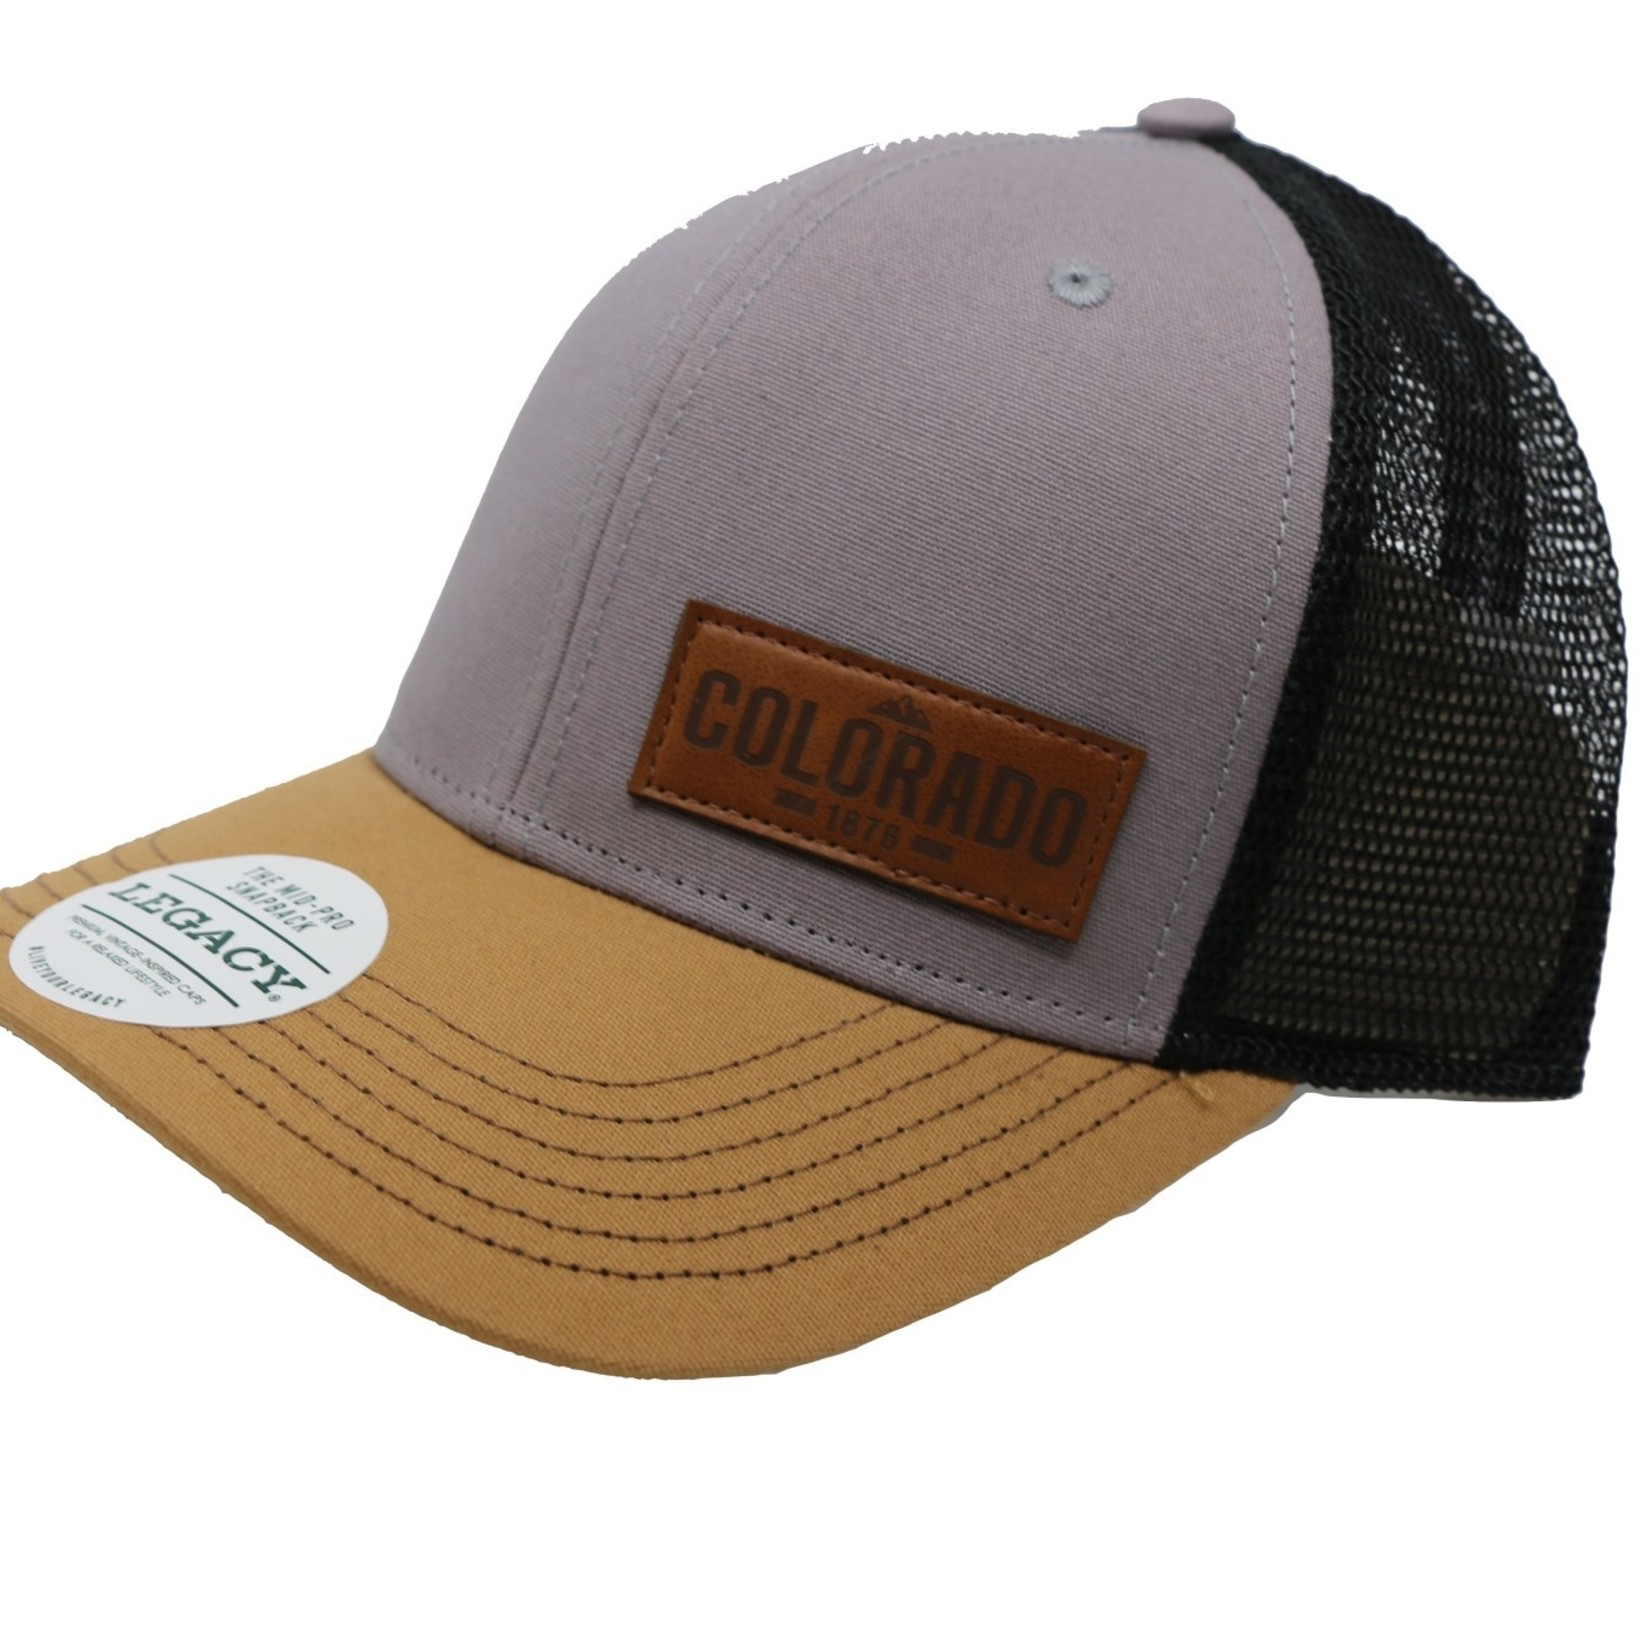 LEGACY Colorado Leather Patch Legacy Old Favorite Snapback Cap